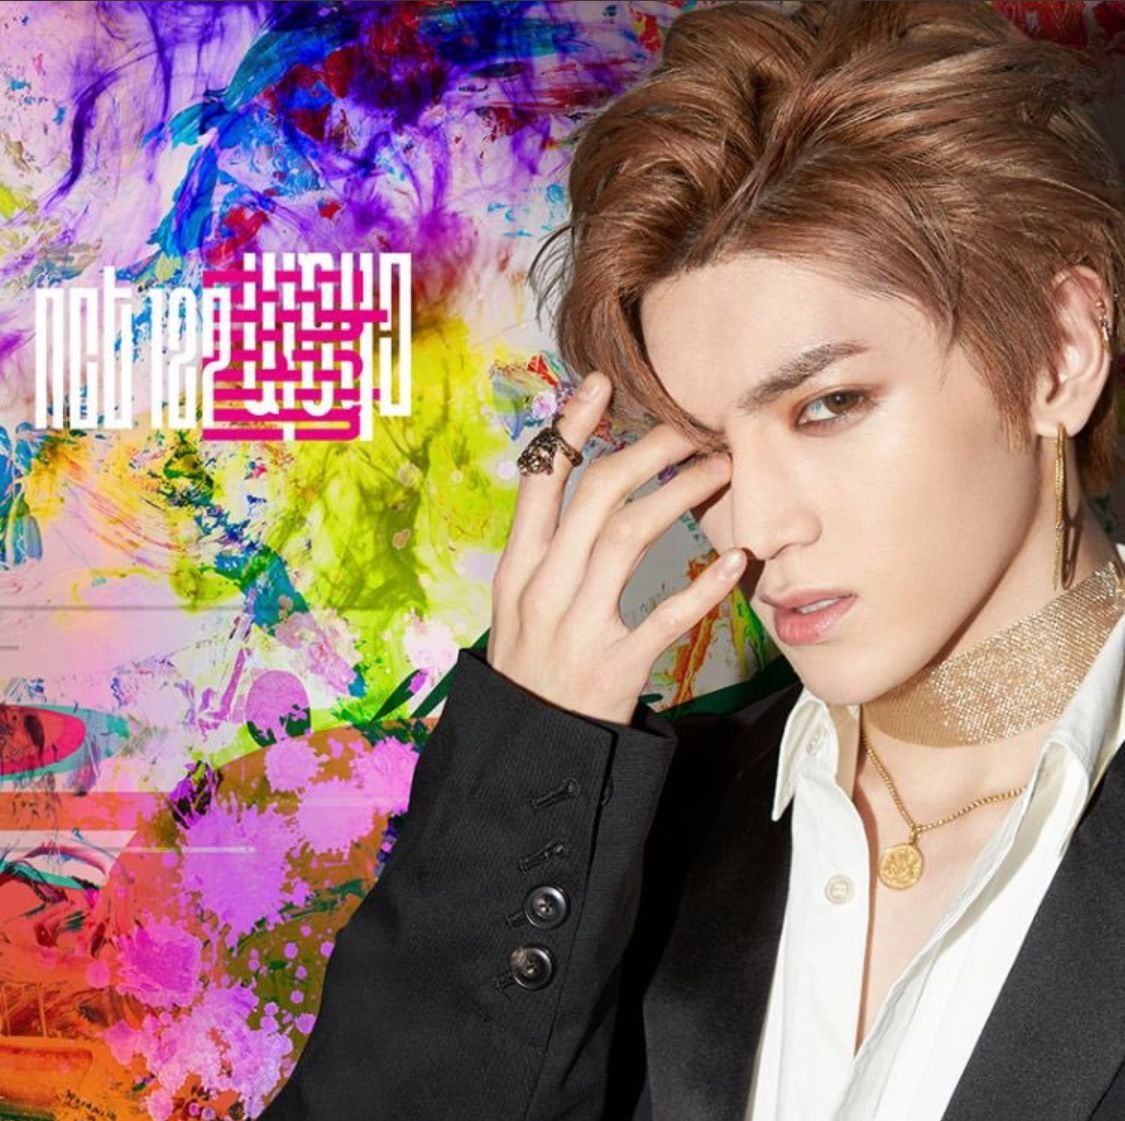 Download MP3 NCT 127 - Chain - Download Mp3 Video